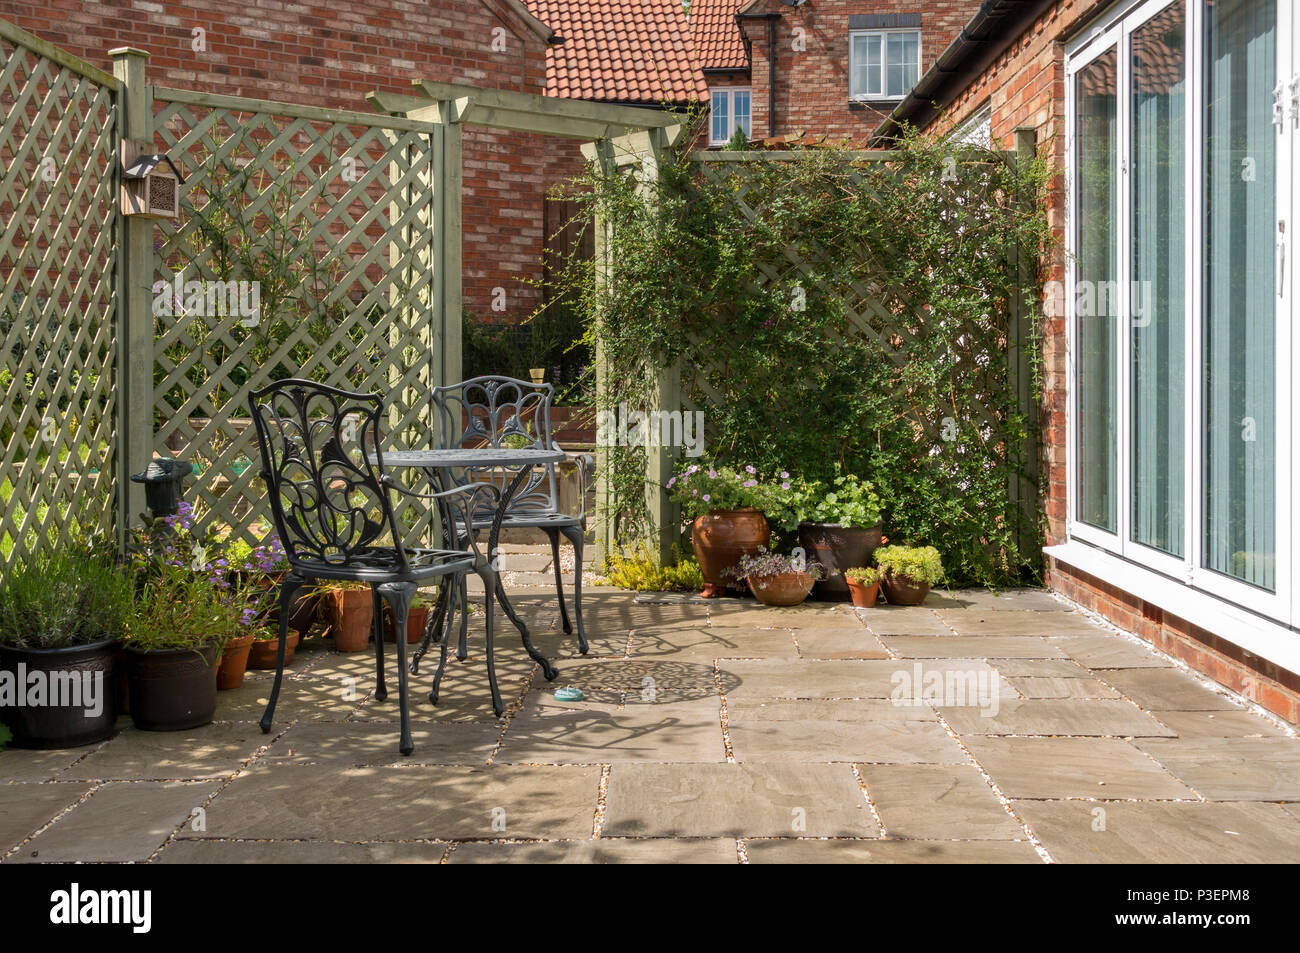 Small domestic garden patio with metal table and chairs, natural stone slabs and painted trellis Stock Photo